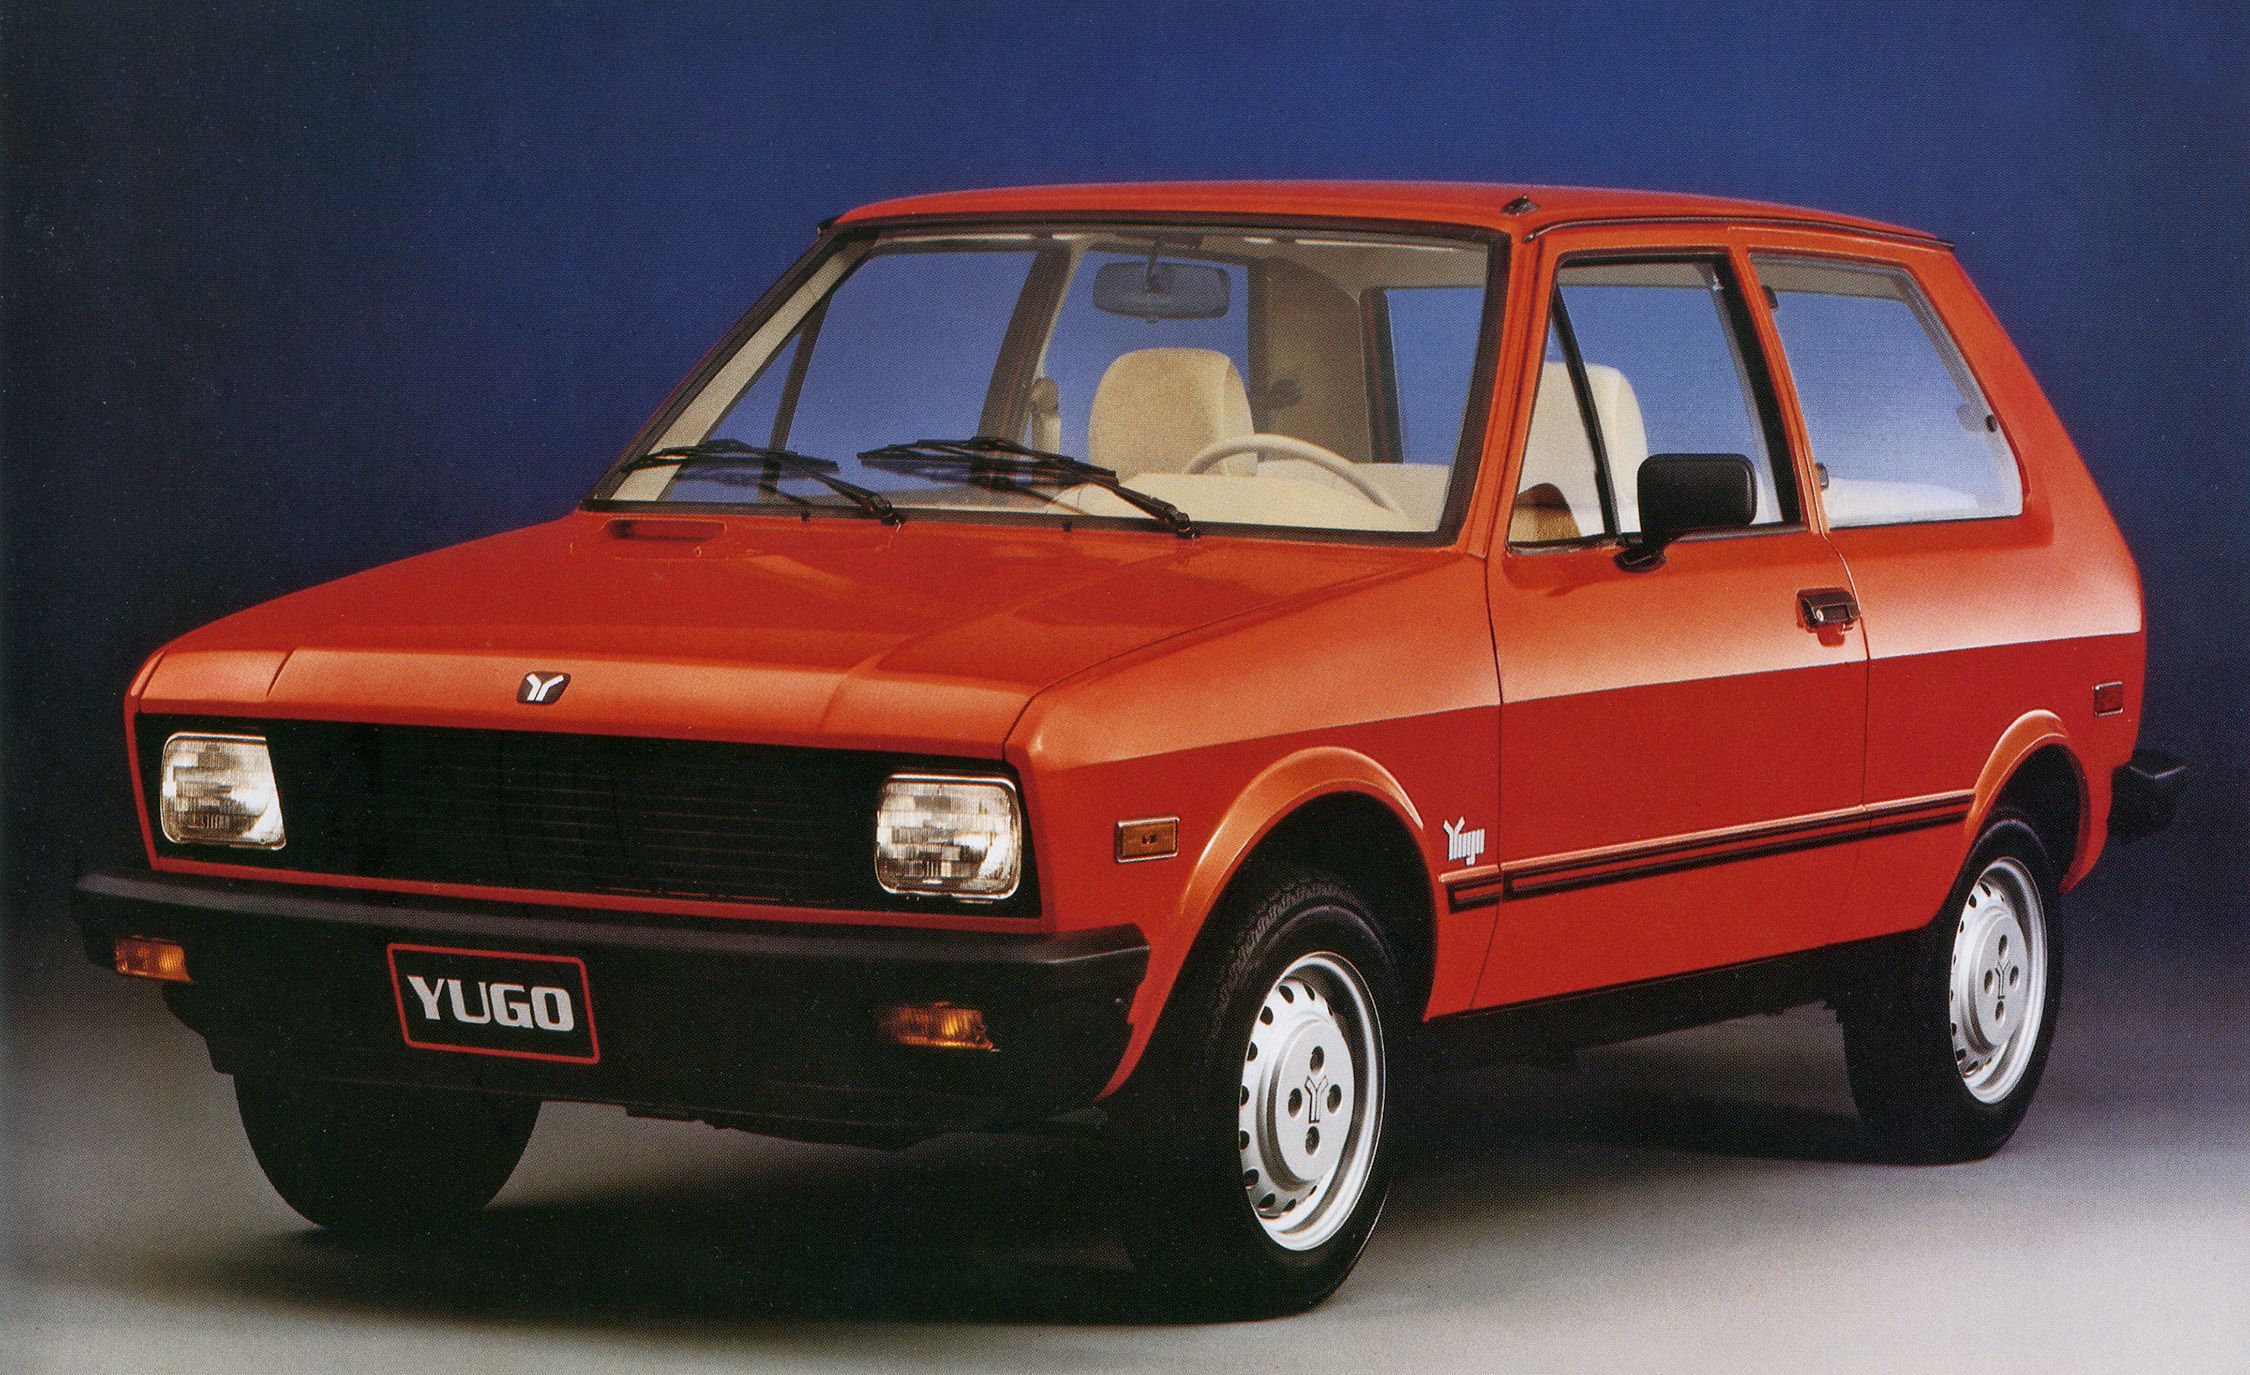 A Quick Look at the Yugo, the Worst Car in History